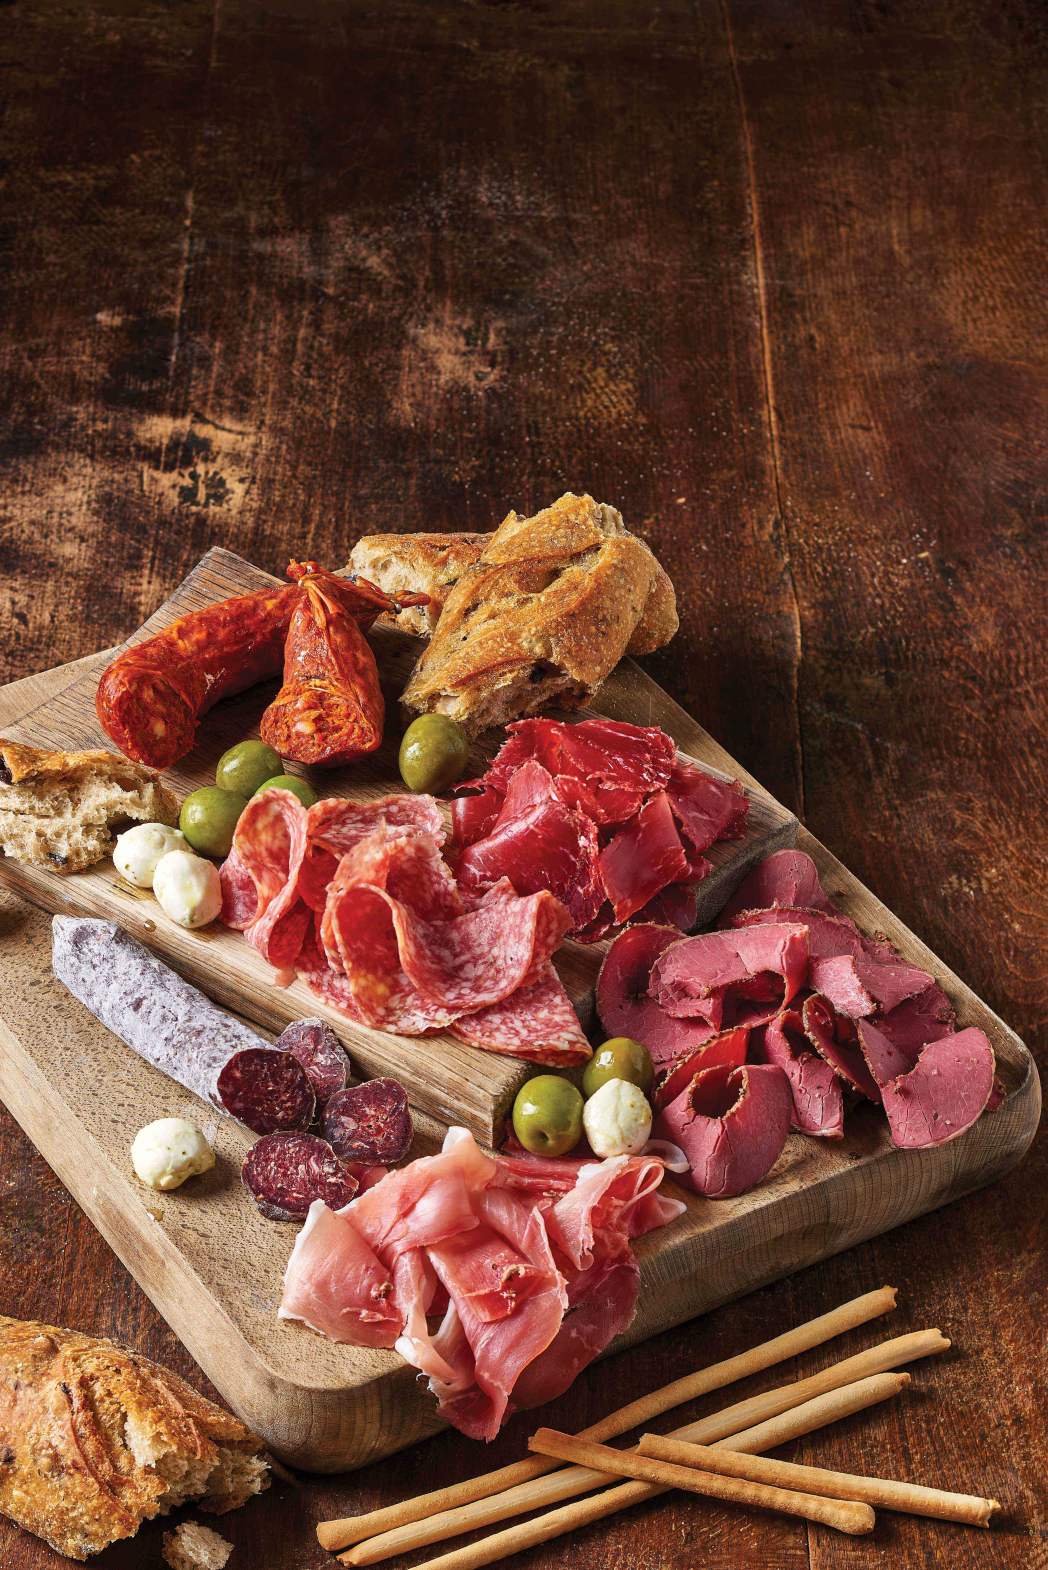 Image for blog - Tried & Tested: The Best British Charcuterie